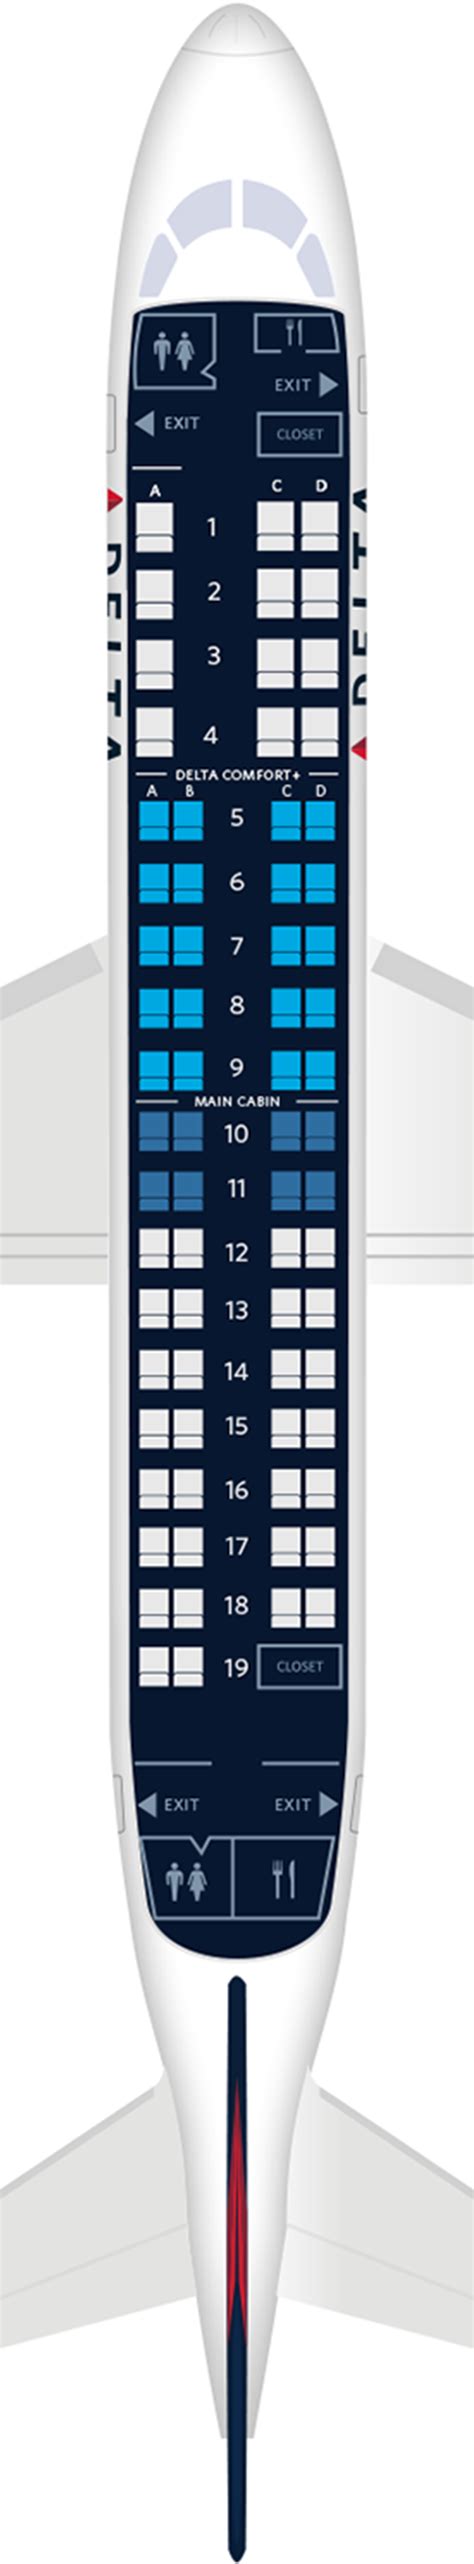 Detailed seat map Alaska Airlines - Horizon Air Embraer 175. Find the best airplanes seats, information on legroom, recline and in-flight entertainment using our detailed online seating charts. ... Alaska Airlines - Horizon Air Embraer 175 1 4 of 5 based on 2 user ratings. Reviews. Write review. Link Alaska Airlines - Horizon Air …